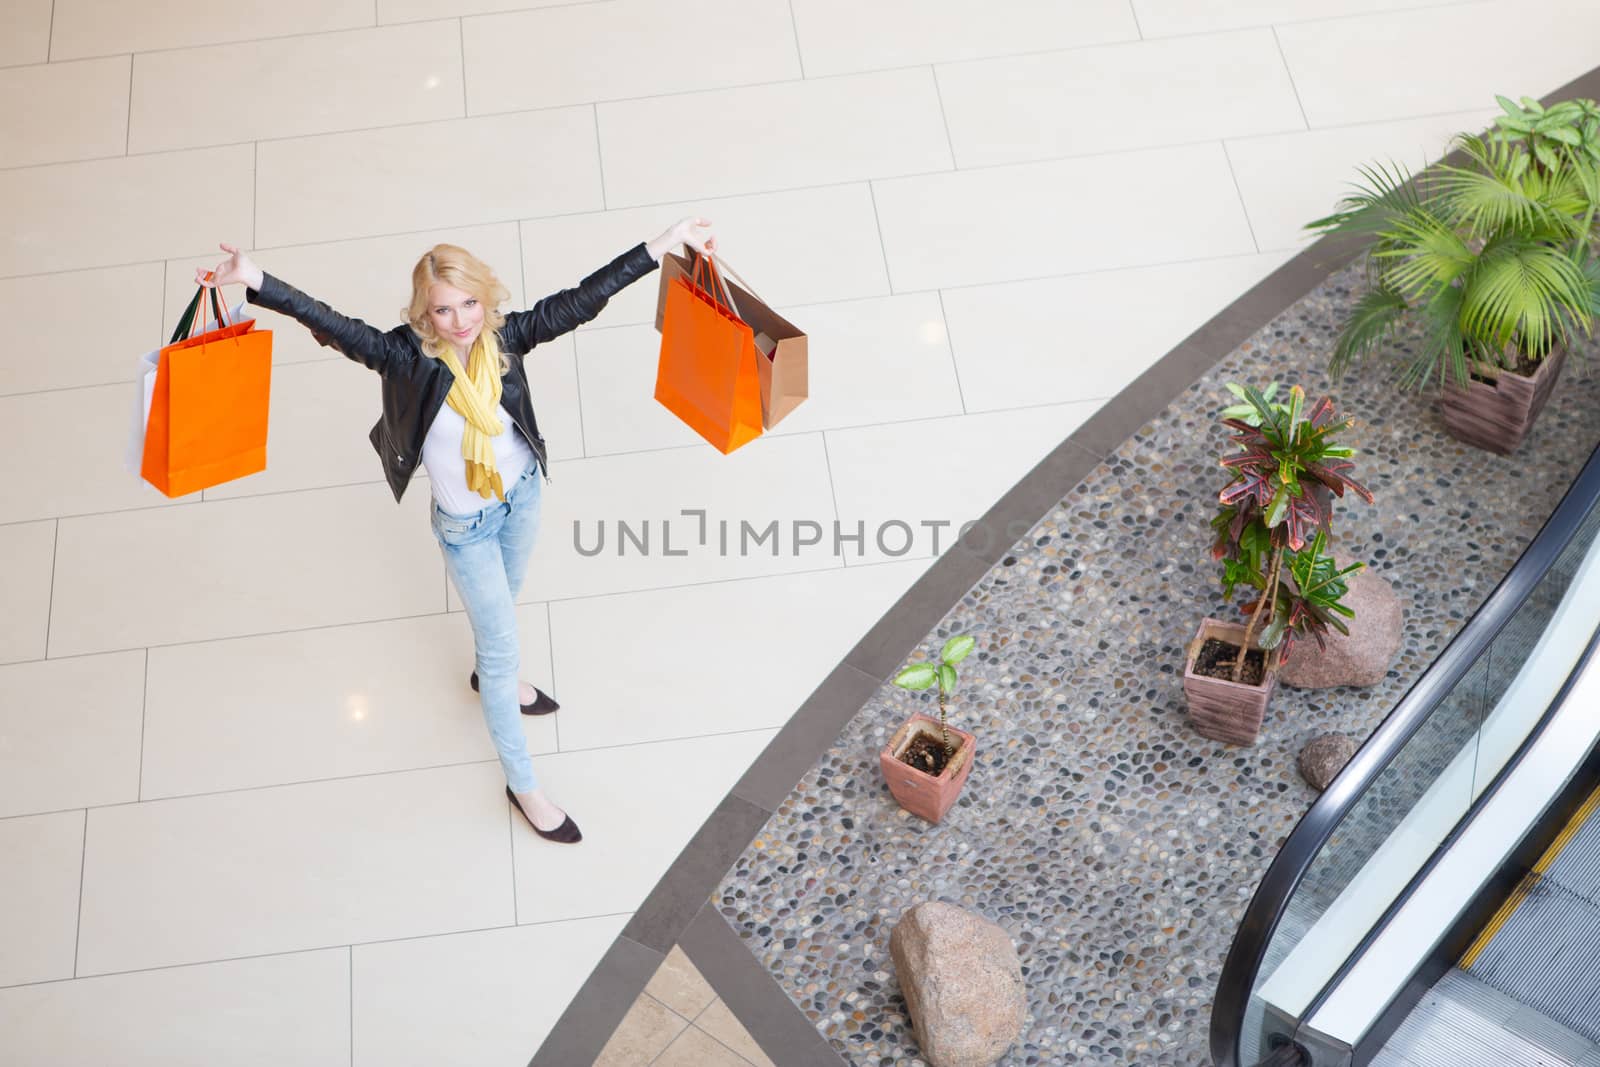 Sale and people - smiling woman with colorful shopping bags, top view